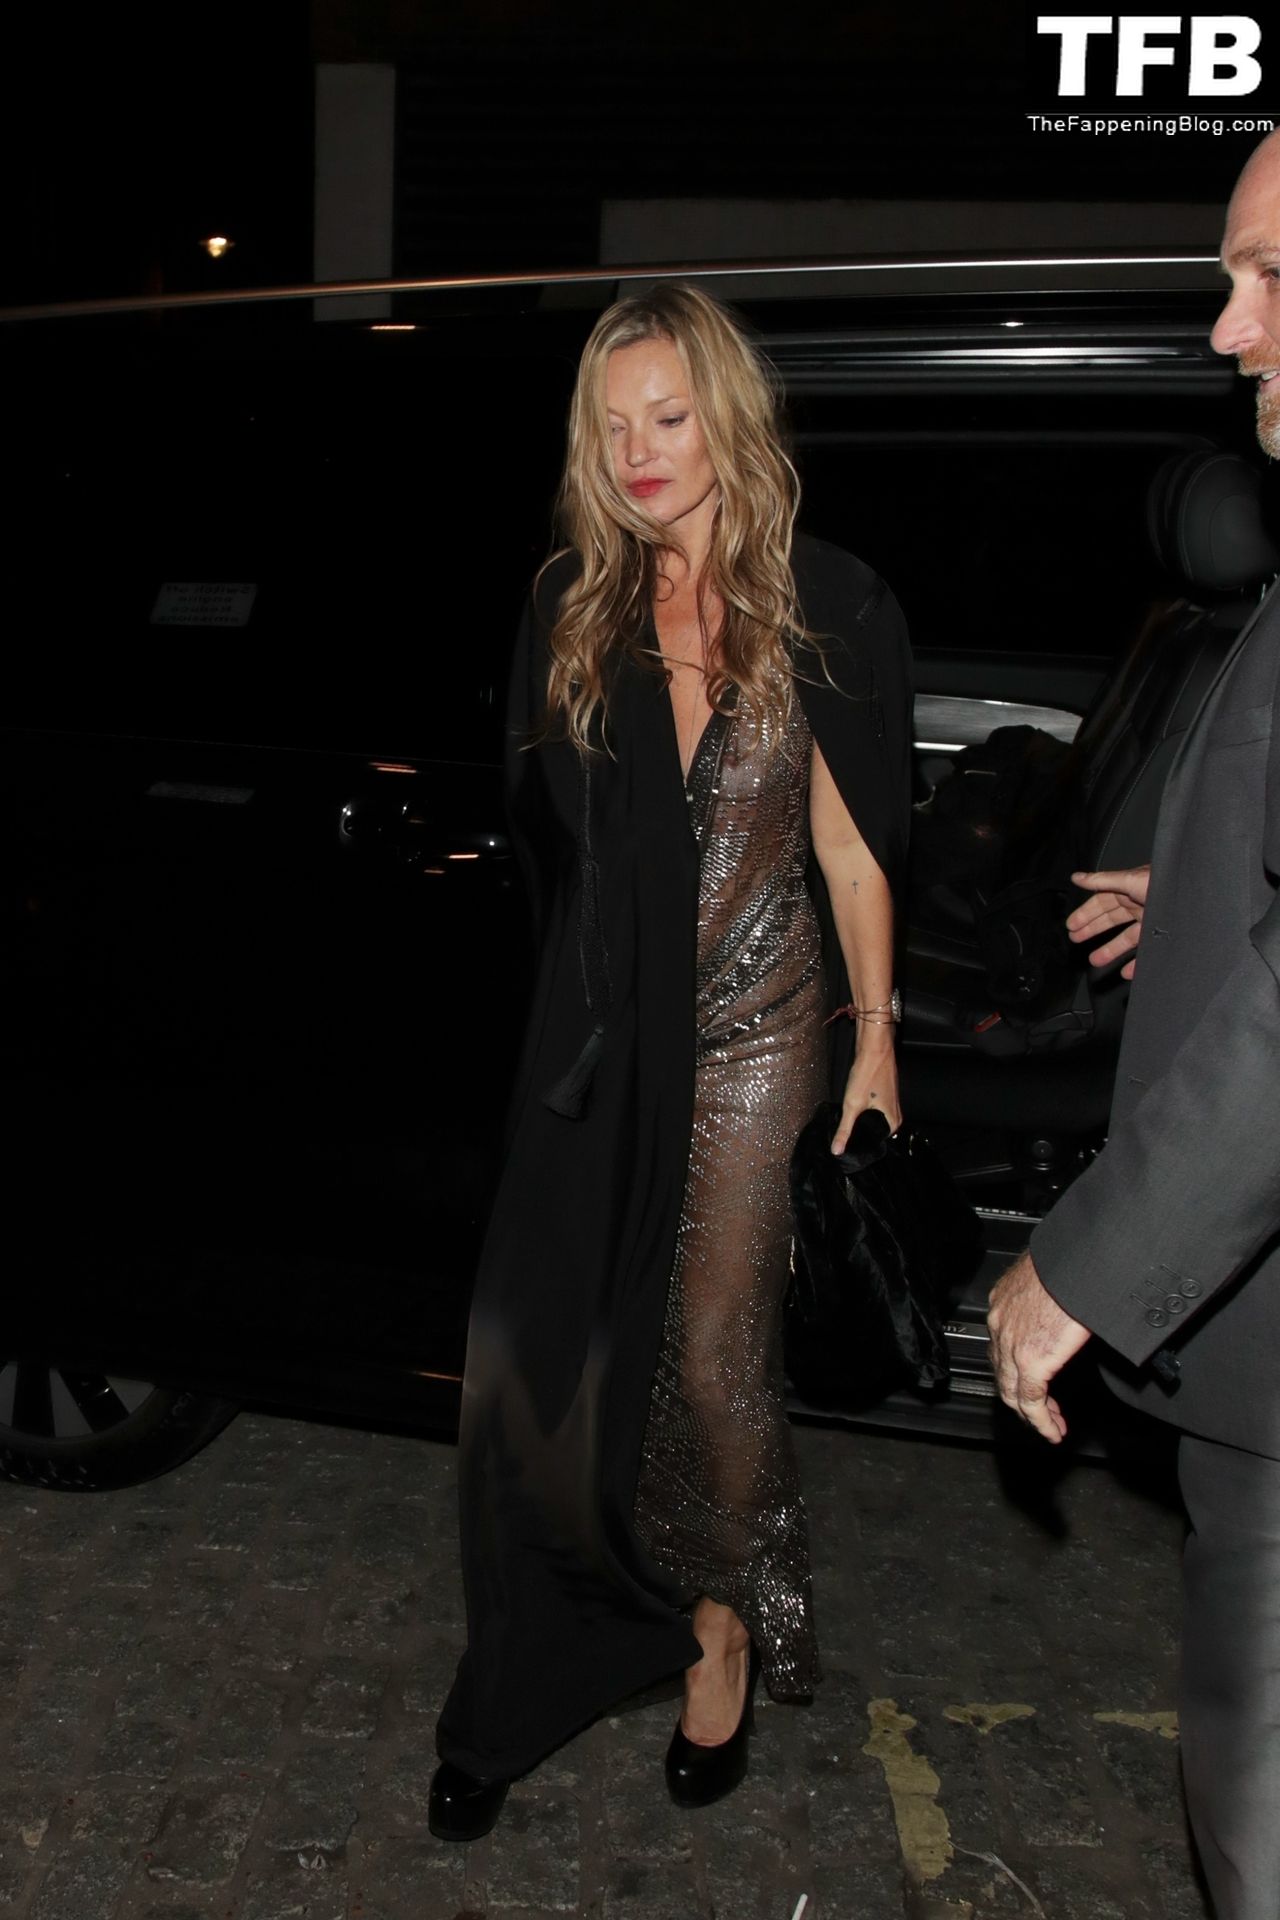 Kate Moss Flashes Nude Tits The Fappening Blog 139 - Kate Moss Flashes Her Nude Breasts in London (150 Photos)